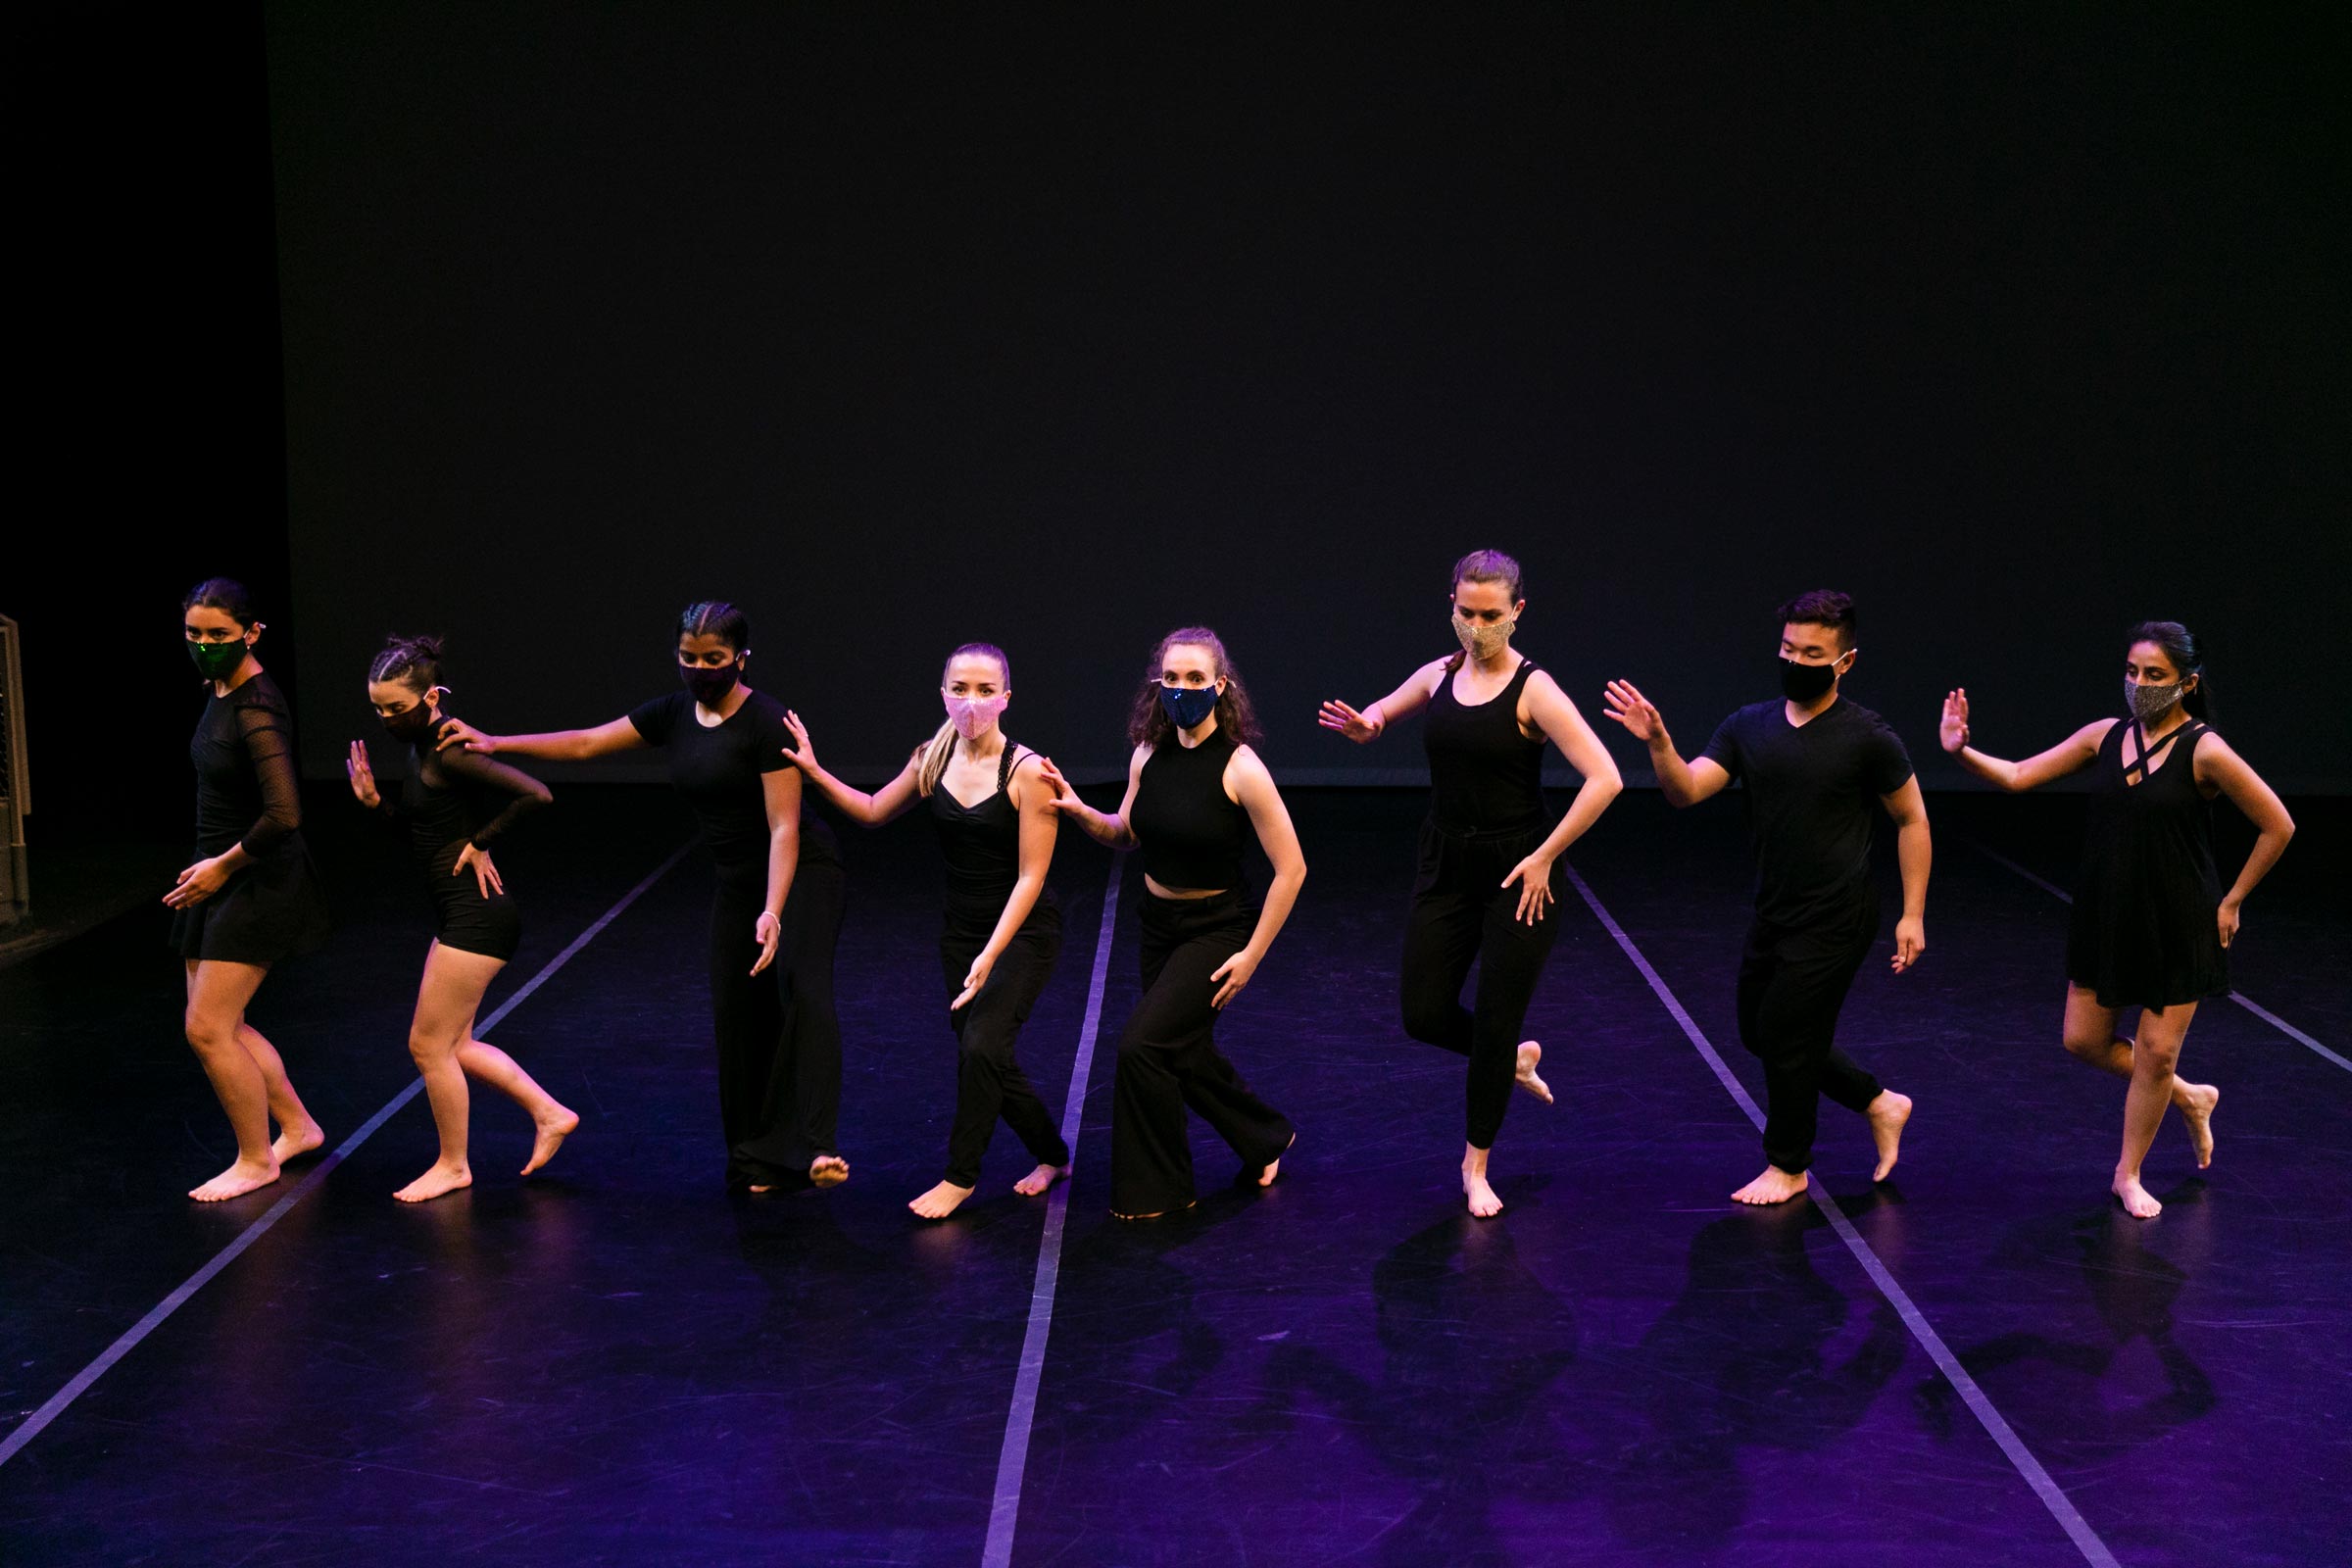 A line of dancers dressed in black, wearing masks, pose on a stage lit in purple